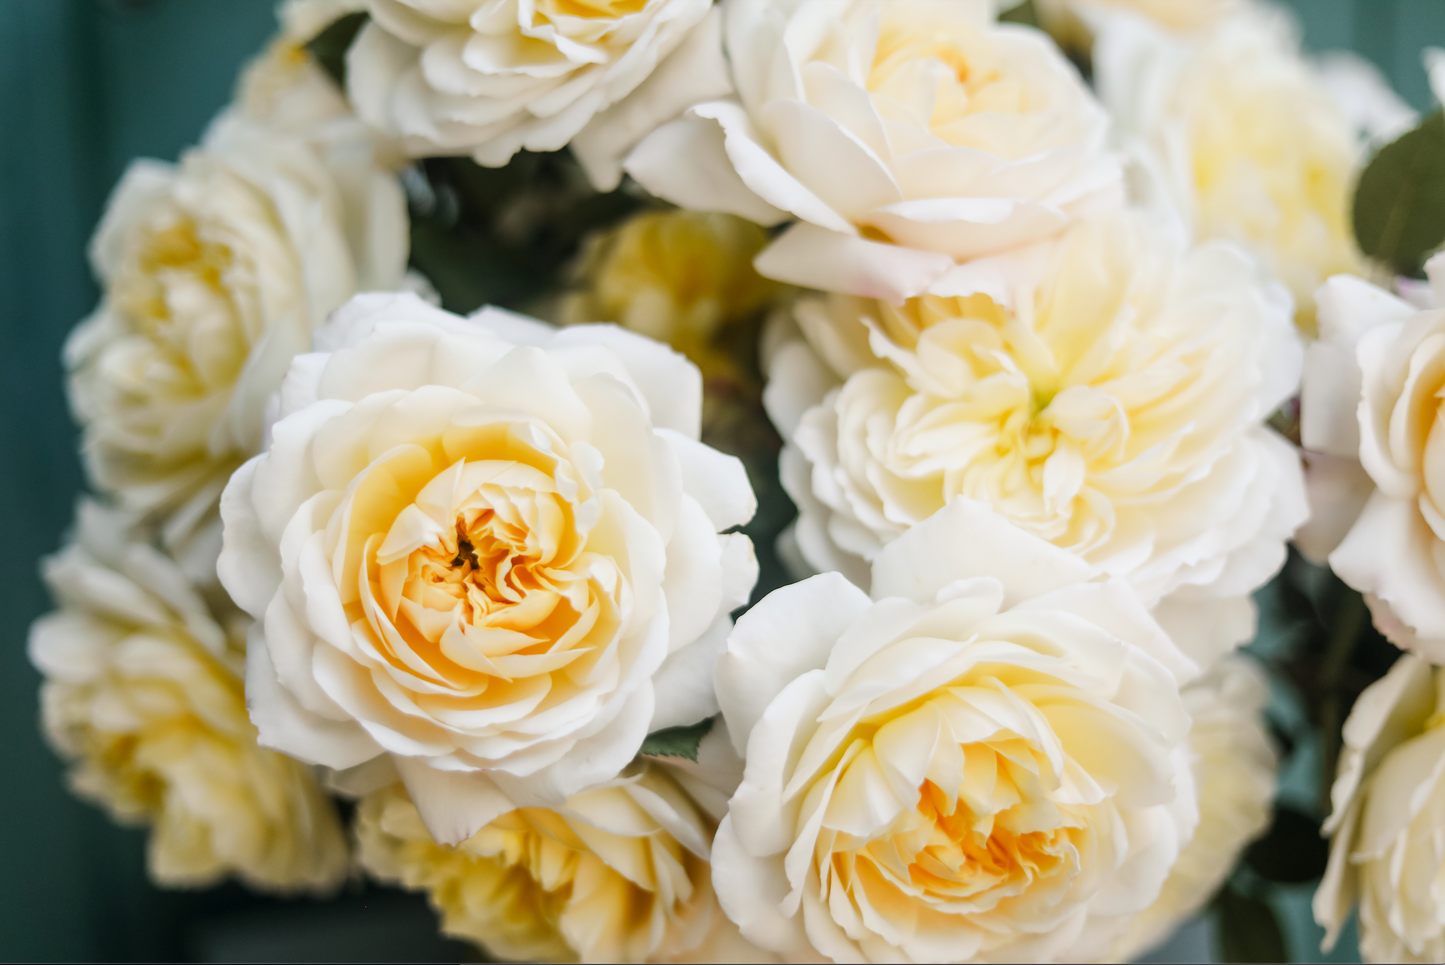 A close up of a flower arrangement, featuring open blooms of soft yellow garden roses from Rose Story Farm in Santa Barbara, CA.